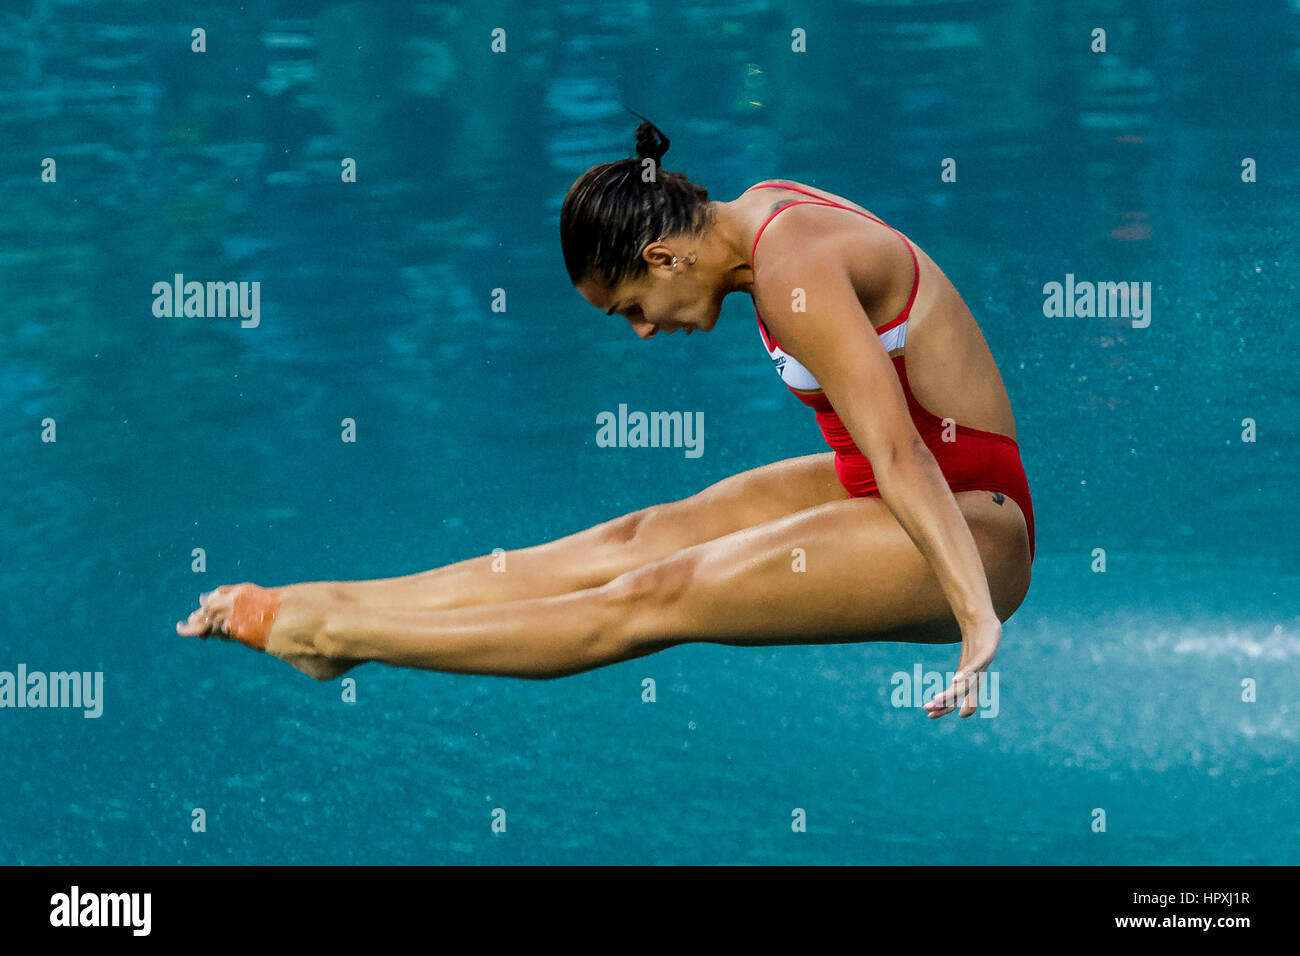 Rio de Janeiro, Brazil. 14 August 2016 Pamela Ware (CAN) competes in the Diving Springboard 3m final at the 2016 Olympic Summer Games. ©Paul J. Sutton Stock Photo